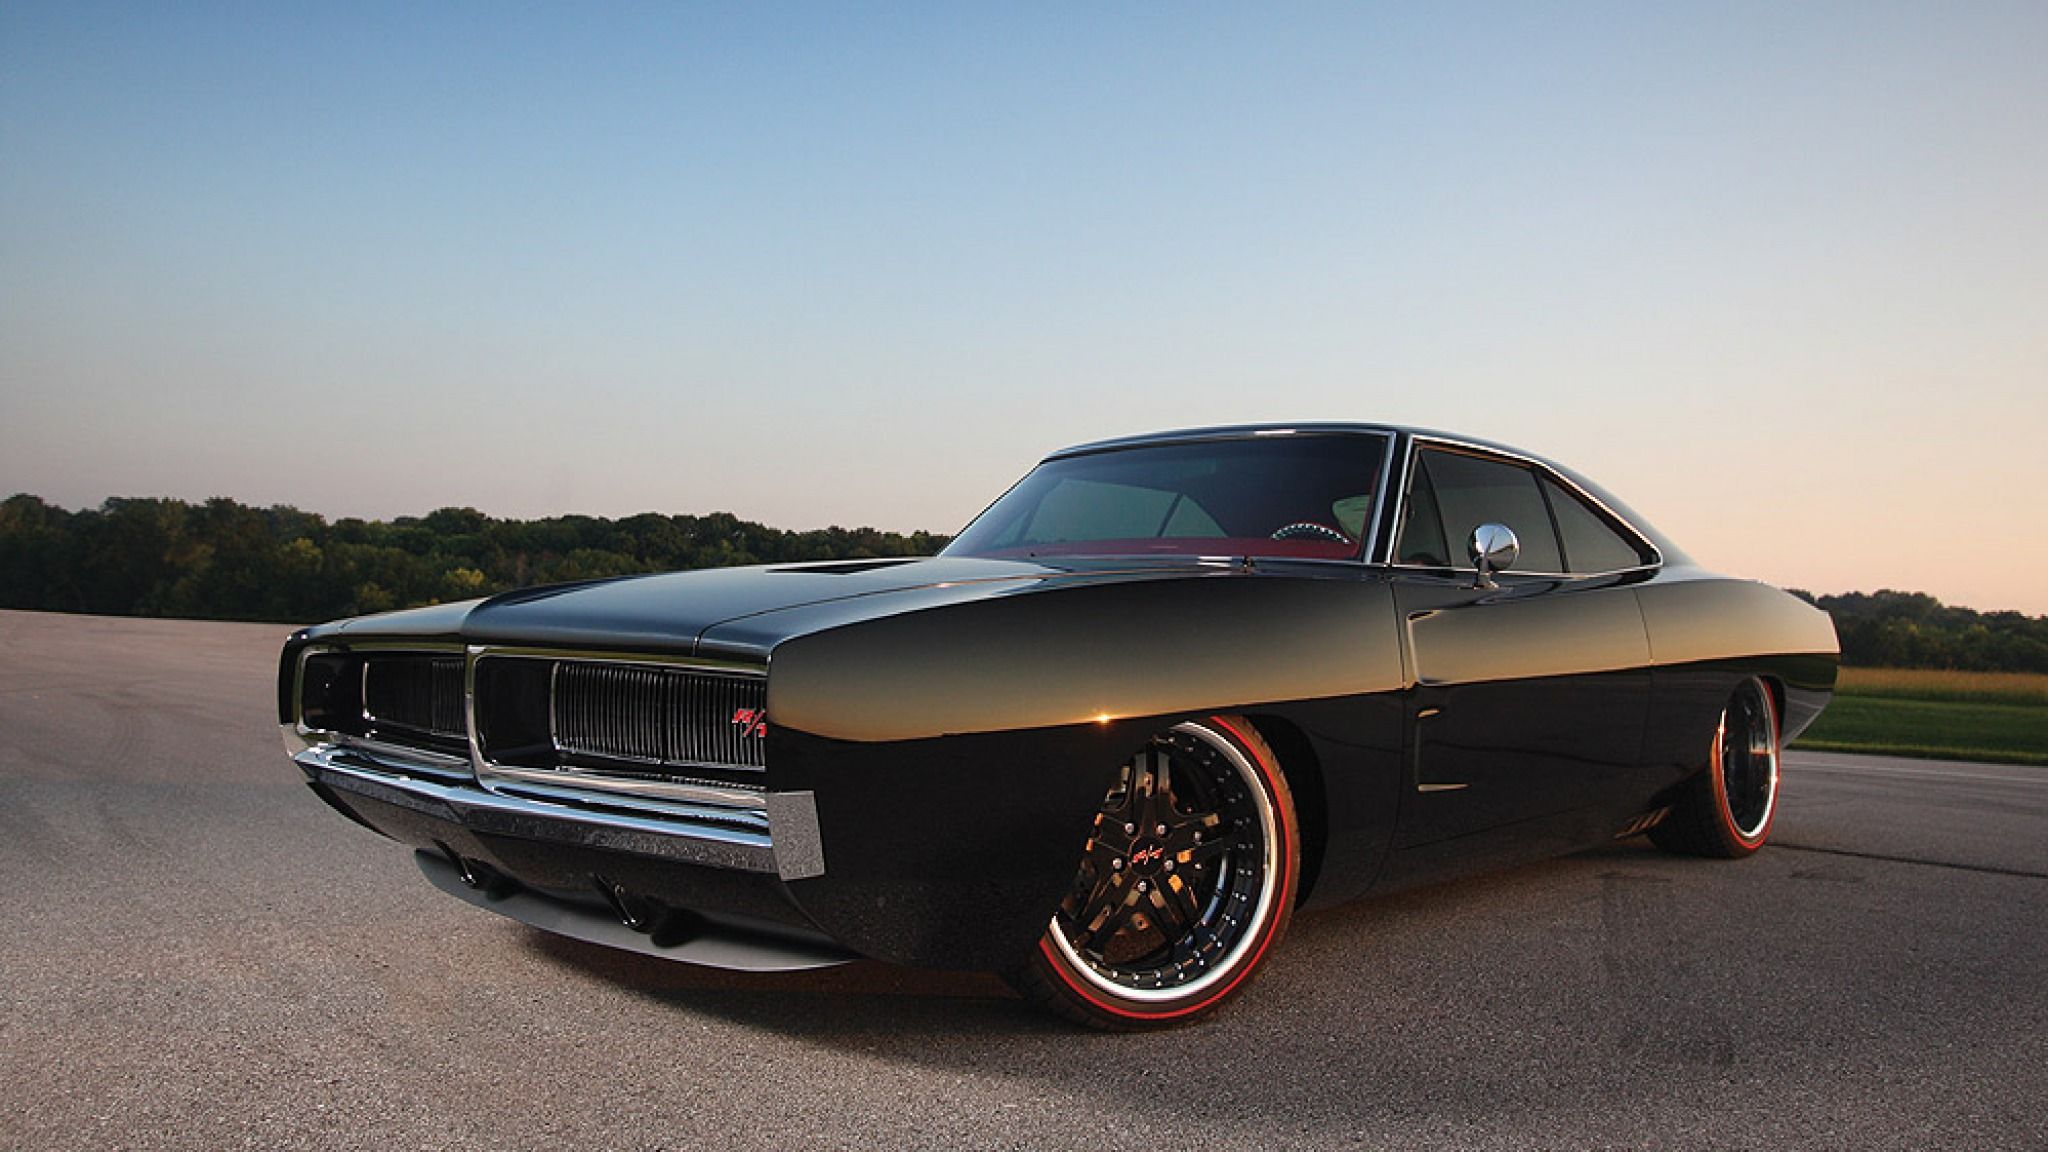 Dodge Charger Wallpaper Cars And Motorcycles